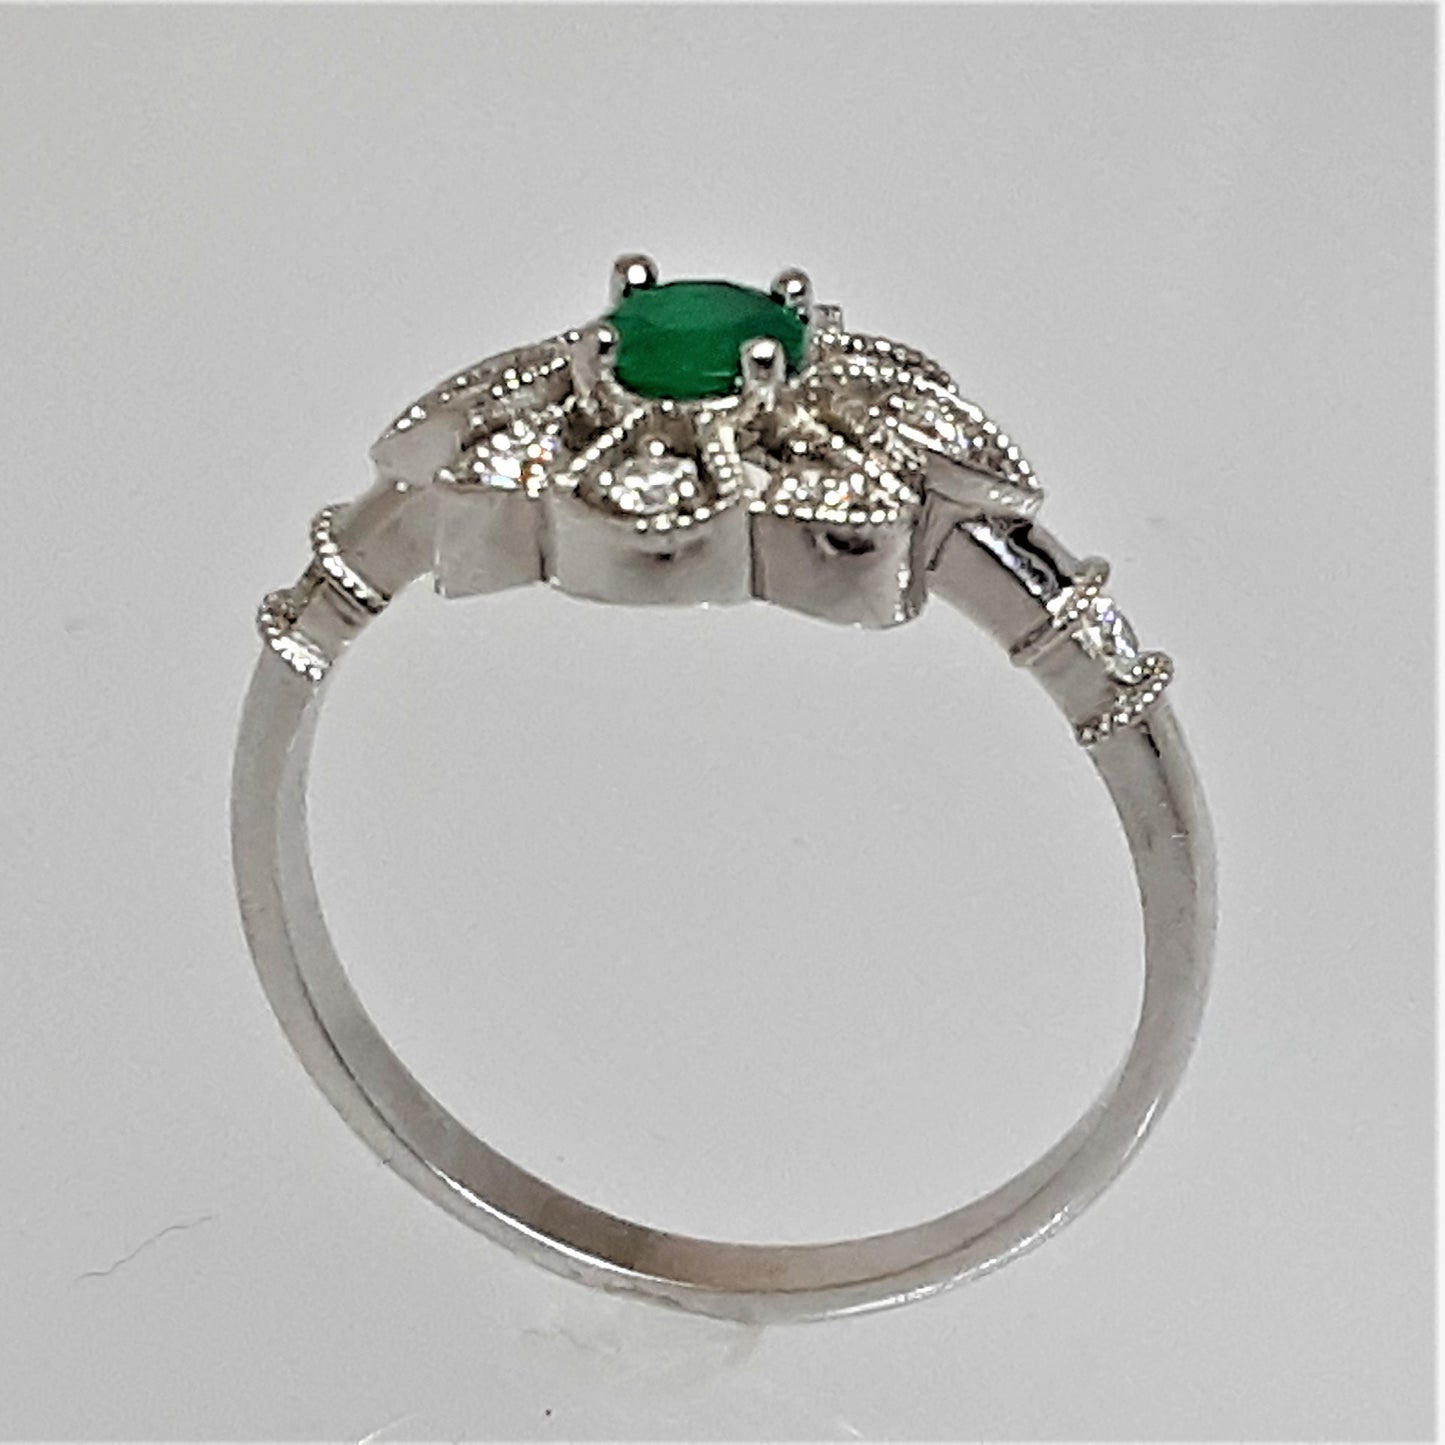 Ready to ship emerald and diamond Art Deco style ring in 14k white gold